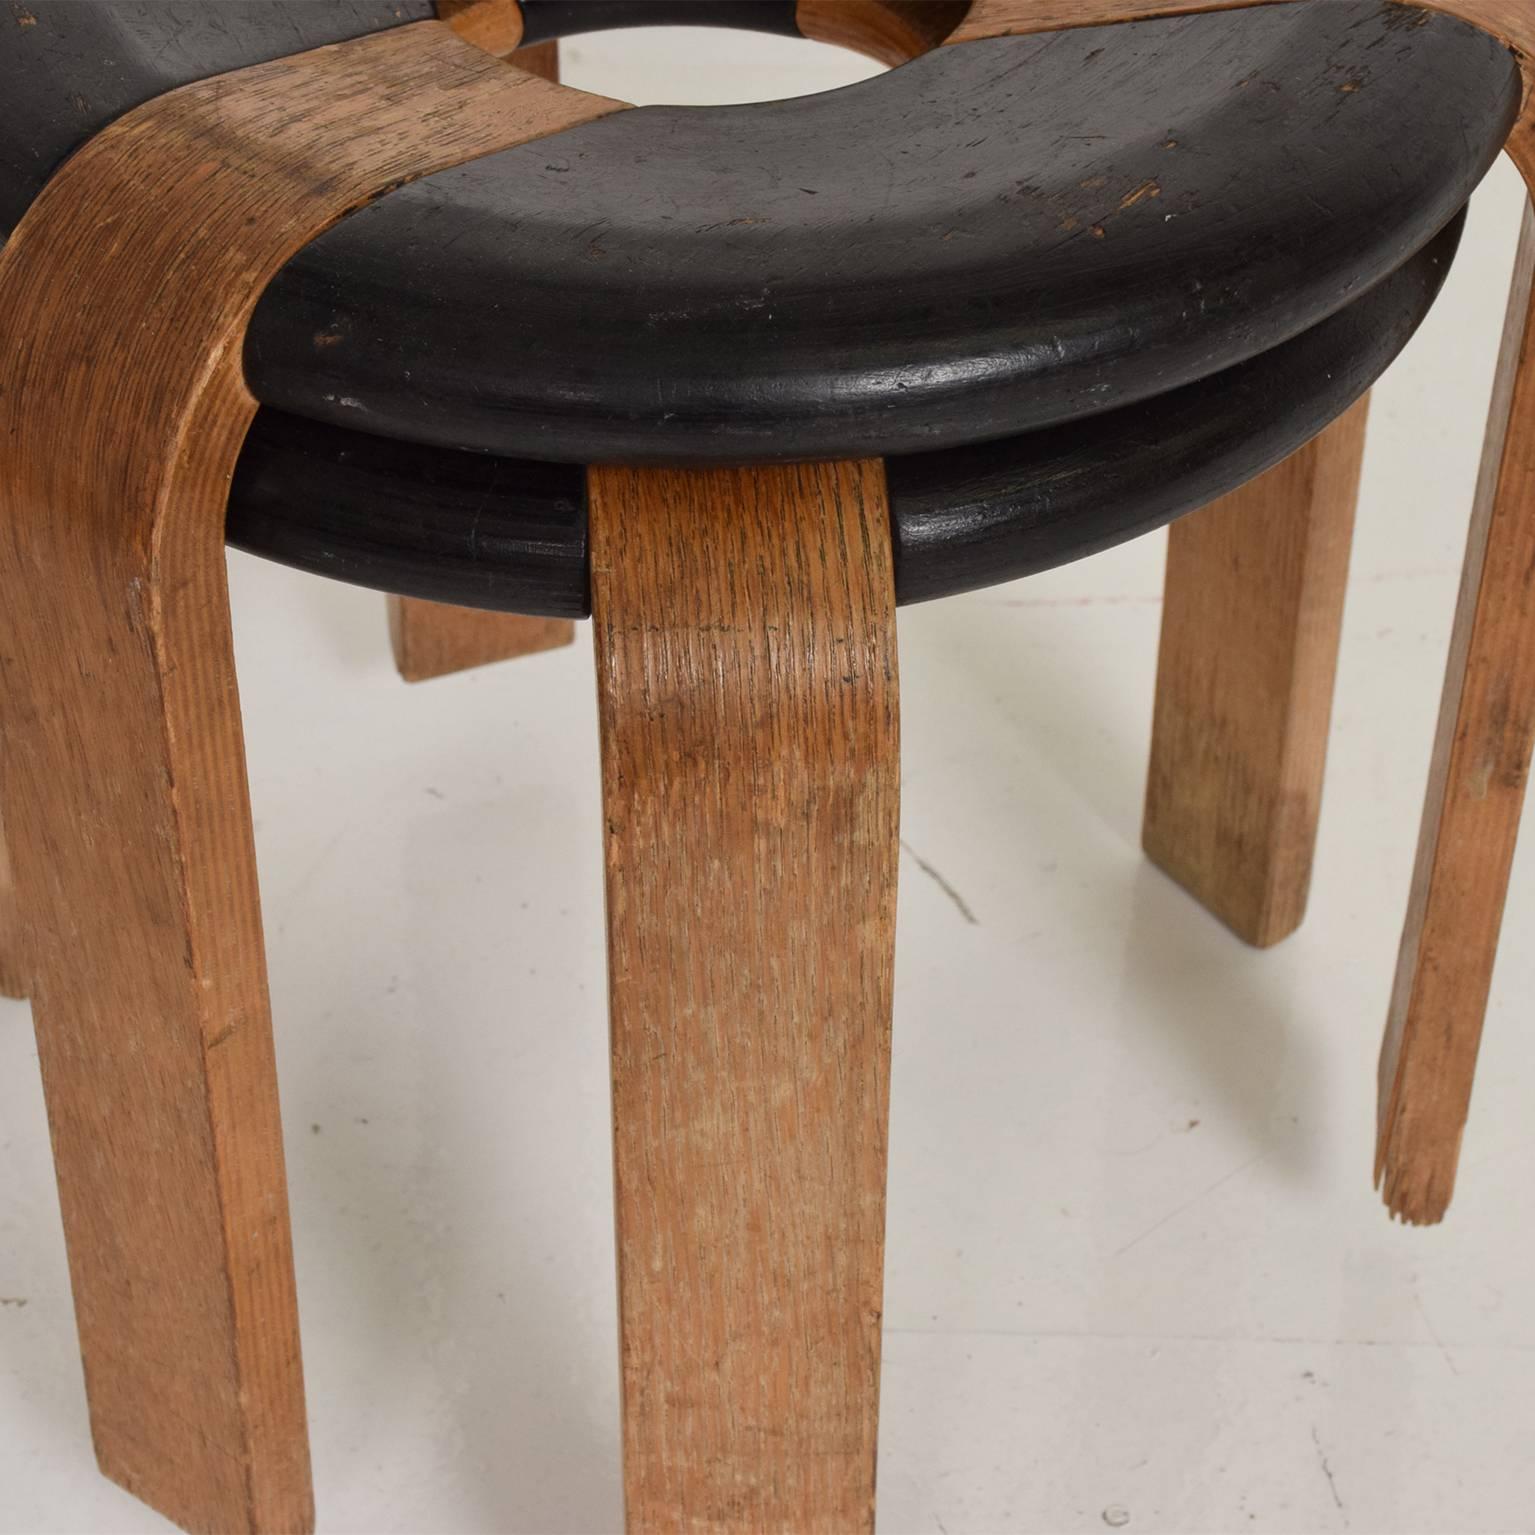 For your consideration, a pair of vintage Donut stools by Rud Thygesen & Jhonny Sorensen, midcentury Danish modern.
Dimensions: 14